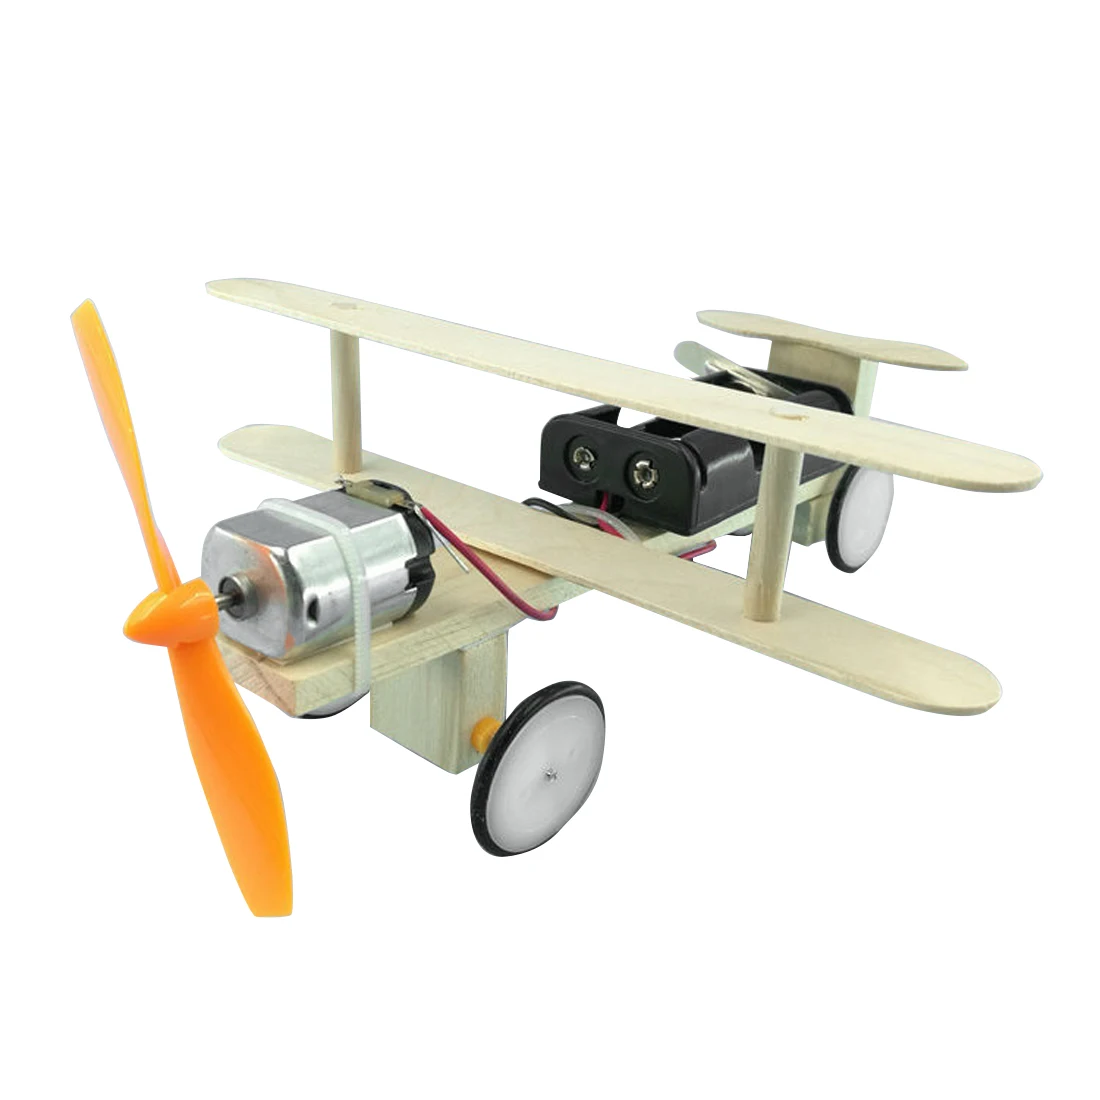 Baby Kids Toy Airplane DIY Model for Science Experimental Educational Learning 